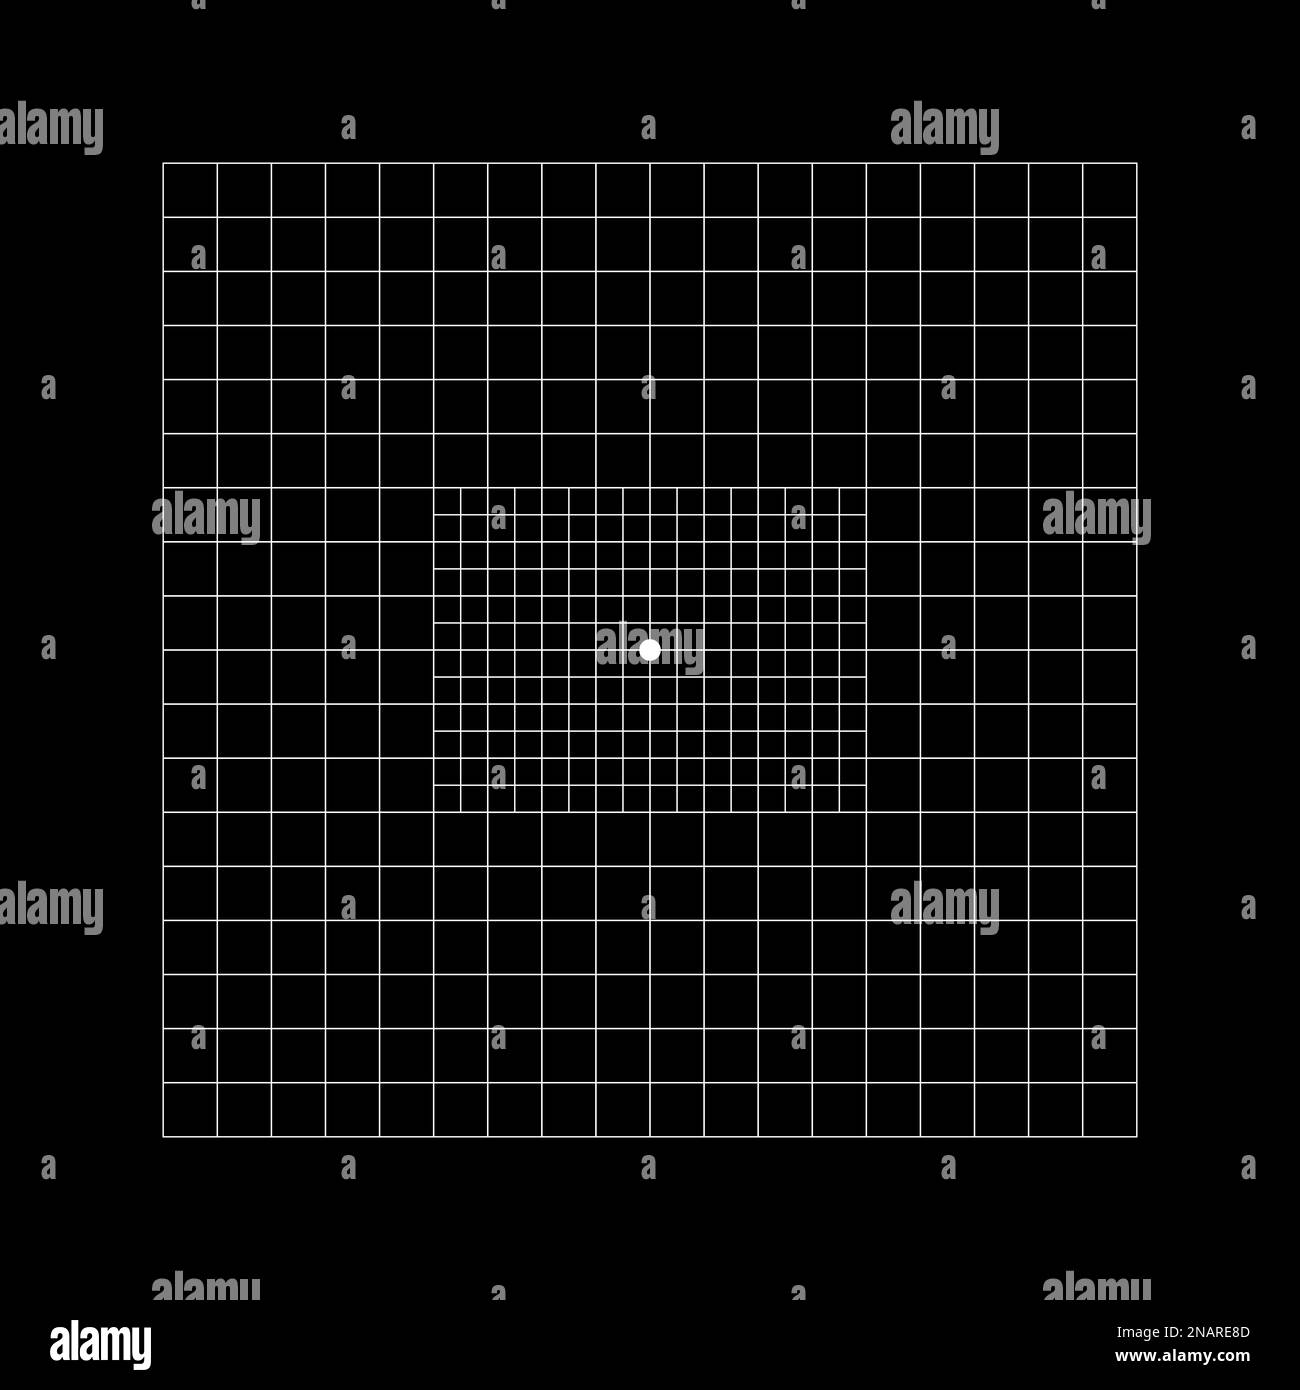 https://c8.alamy.com/comp/2NARE8D/amsler-grid-type-with-central-squares-divided-into-05-degree-squares-graphic-test-to-detecting-vision-defects-ophthalmologic-diagnostic-tool-2NARE8D.jpg